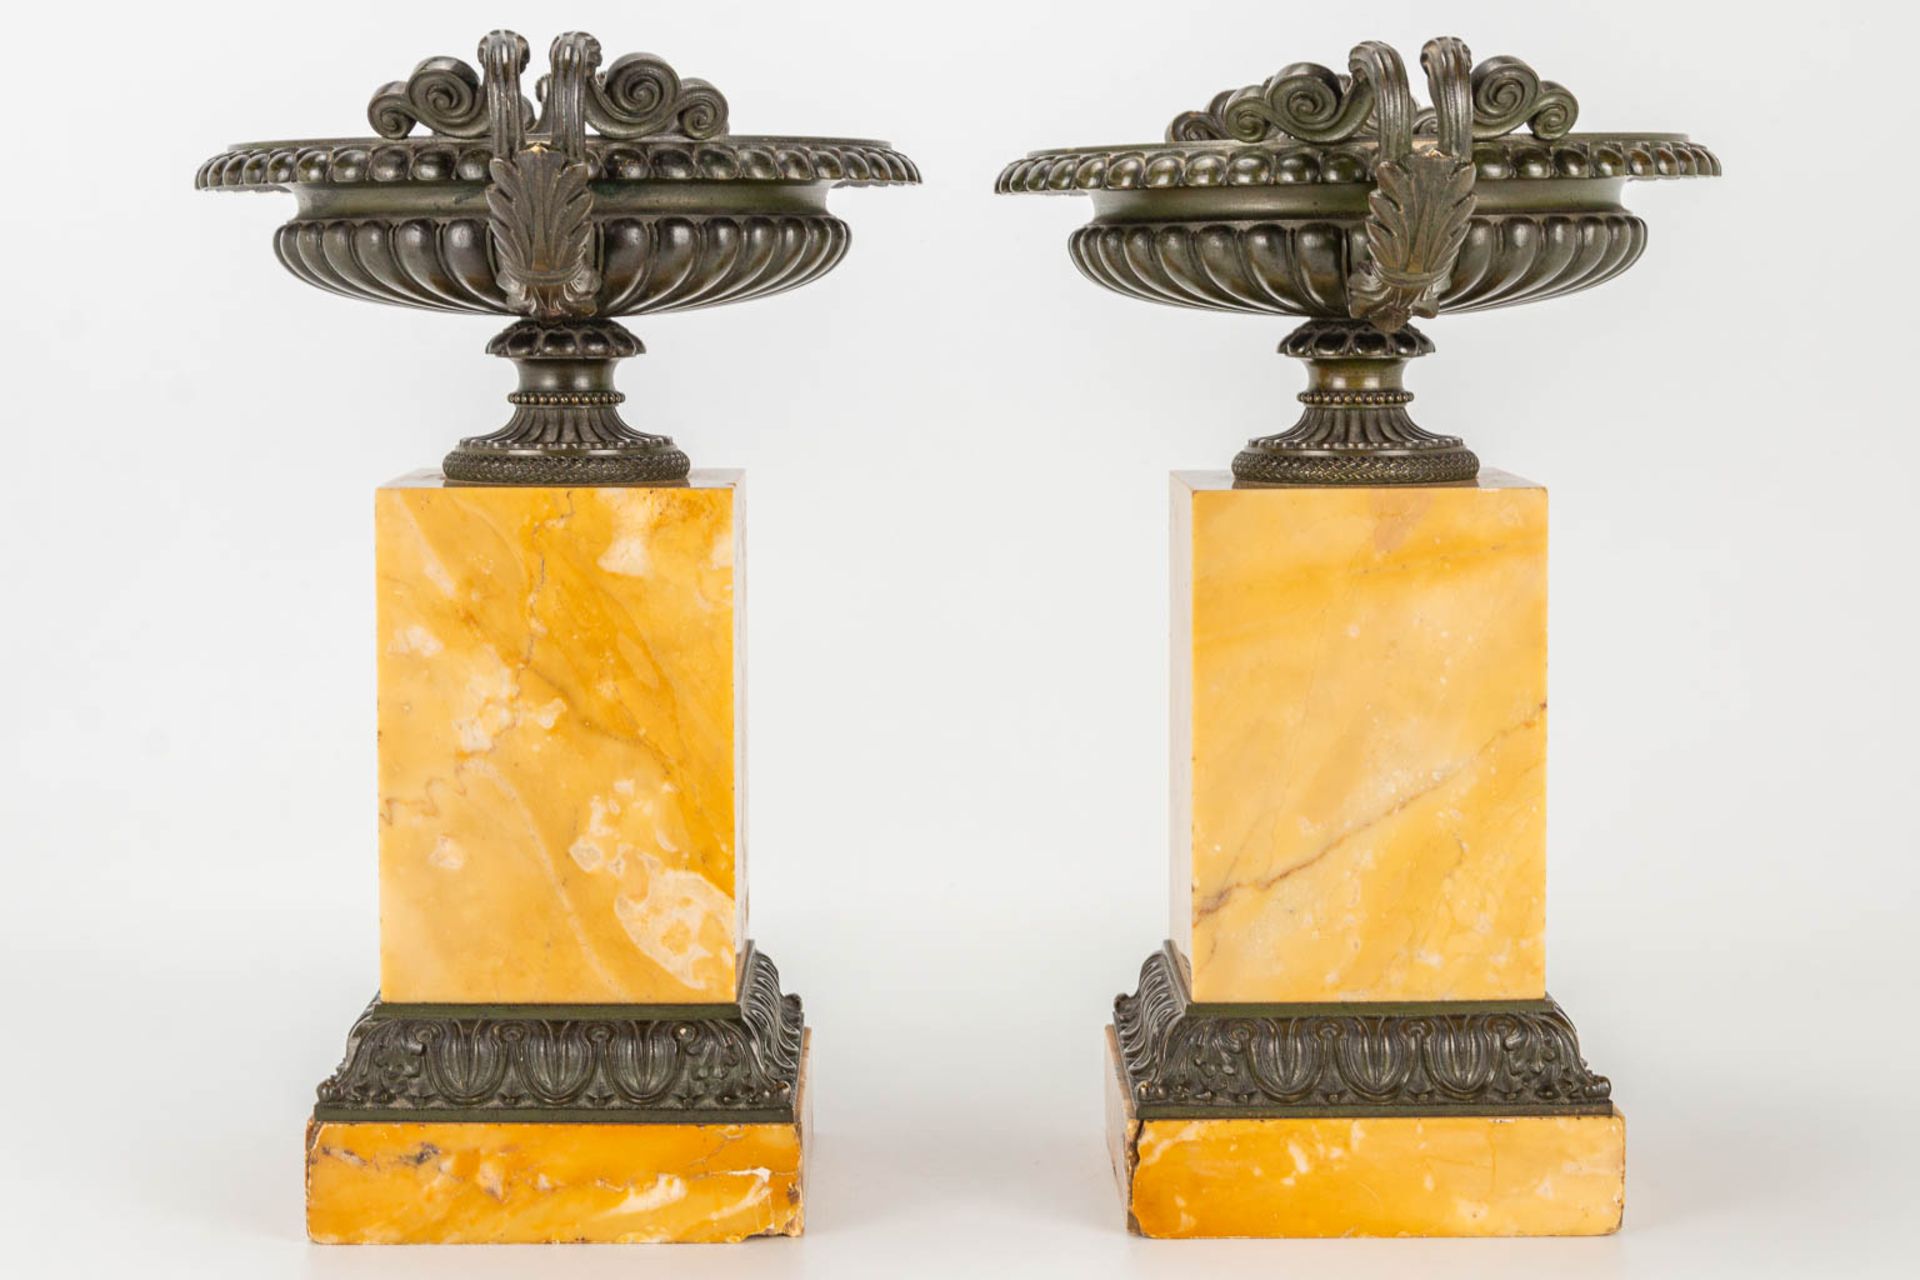 A pair of cassolettes in neoclassical style, made of bronze and mounted on a marble base. - Image 6 of 13